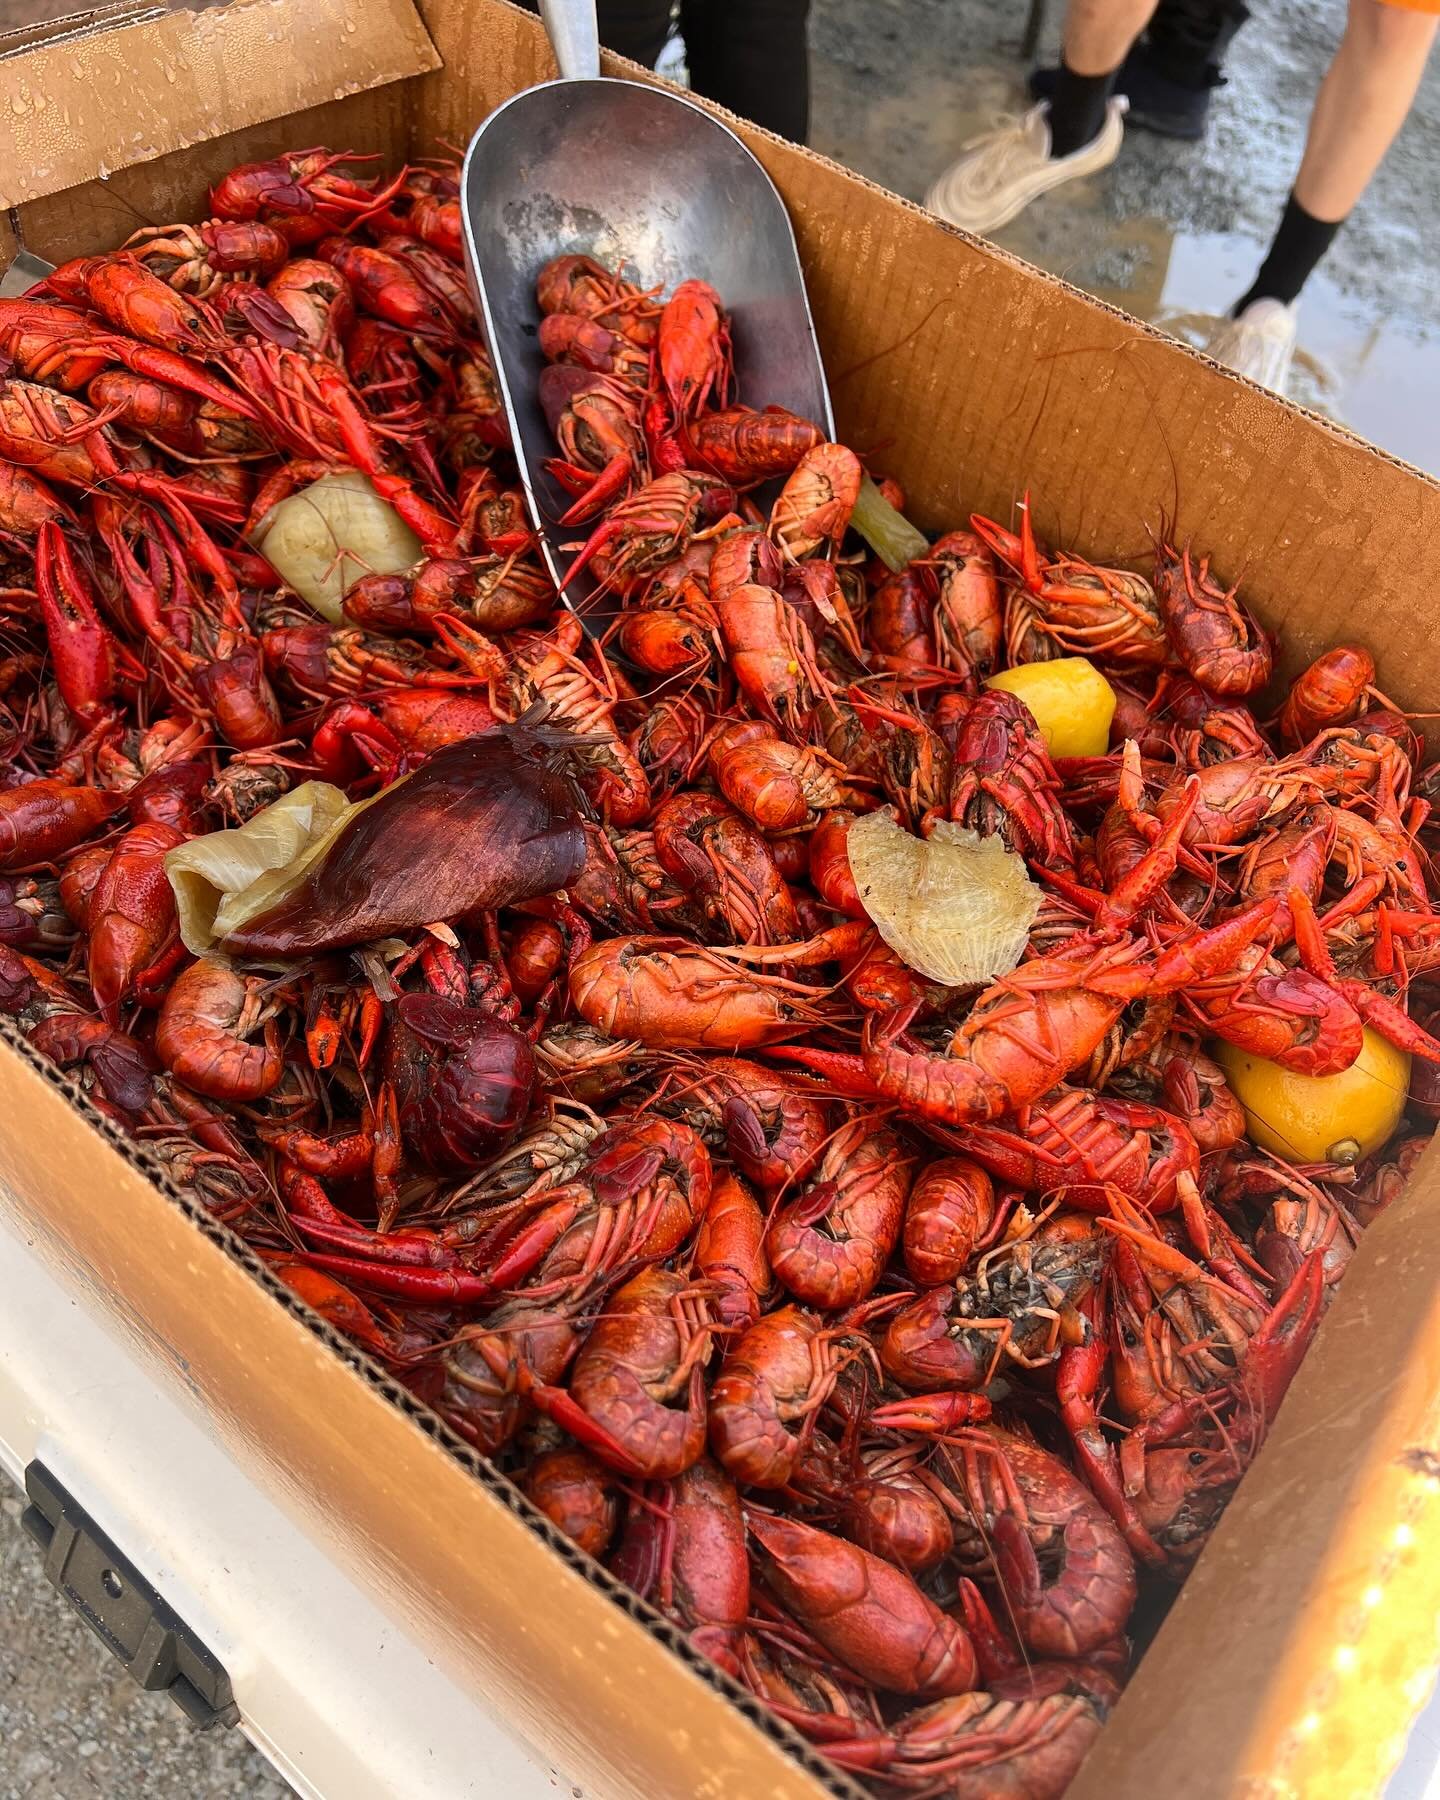 The Camp will be slingin&rsquo; mud bugs and dranks at the 4th Annual Crawfish Festival THIS SATURDAY!!!!! We hope to see YOU there!!!

🦞4th Annual Crawfish Festival
👉Saturday, April 20
⏰12:00 - 10:00 PM
 📍 Crawfish Festival has changed locations!